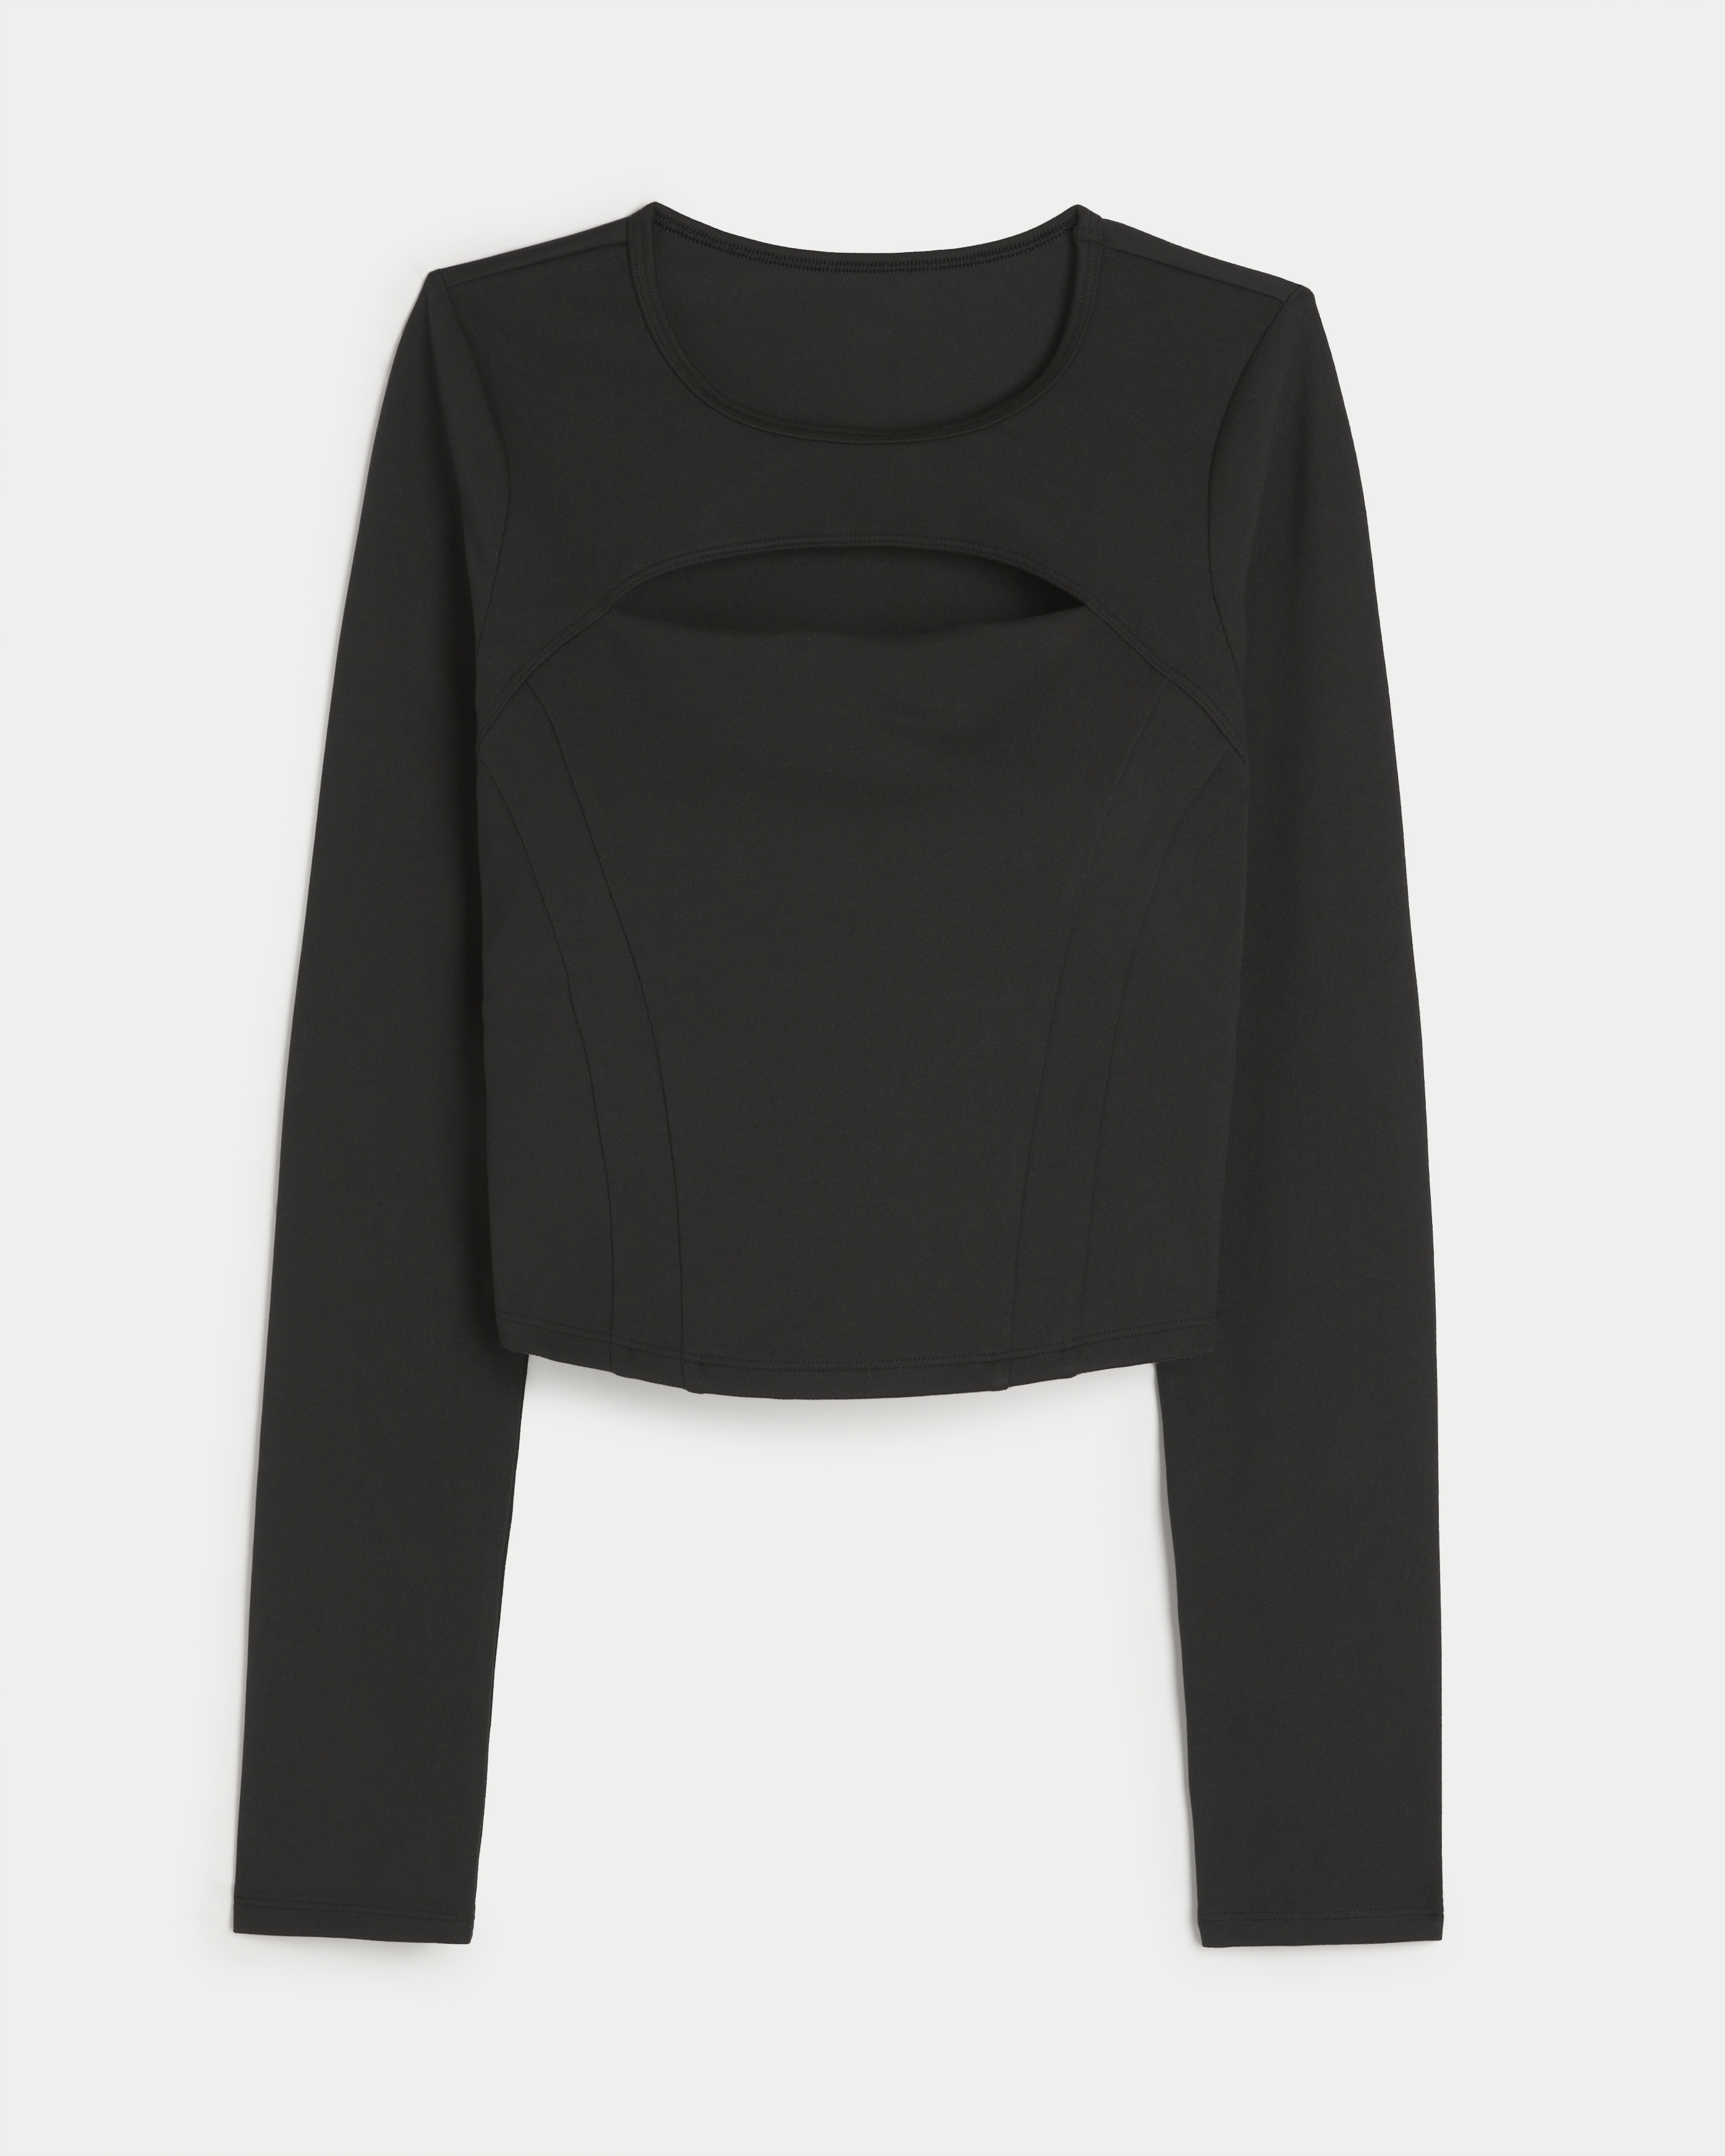 Gilly Hicks Active Recharge Long-Sleeve Cutout Top